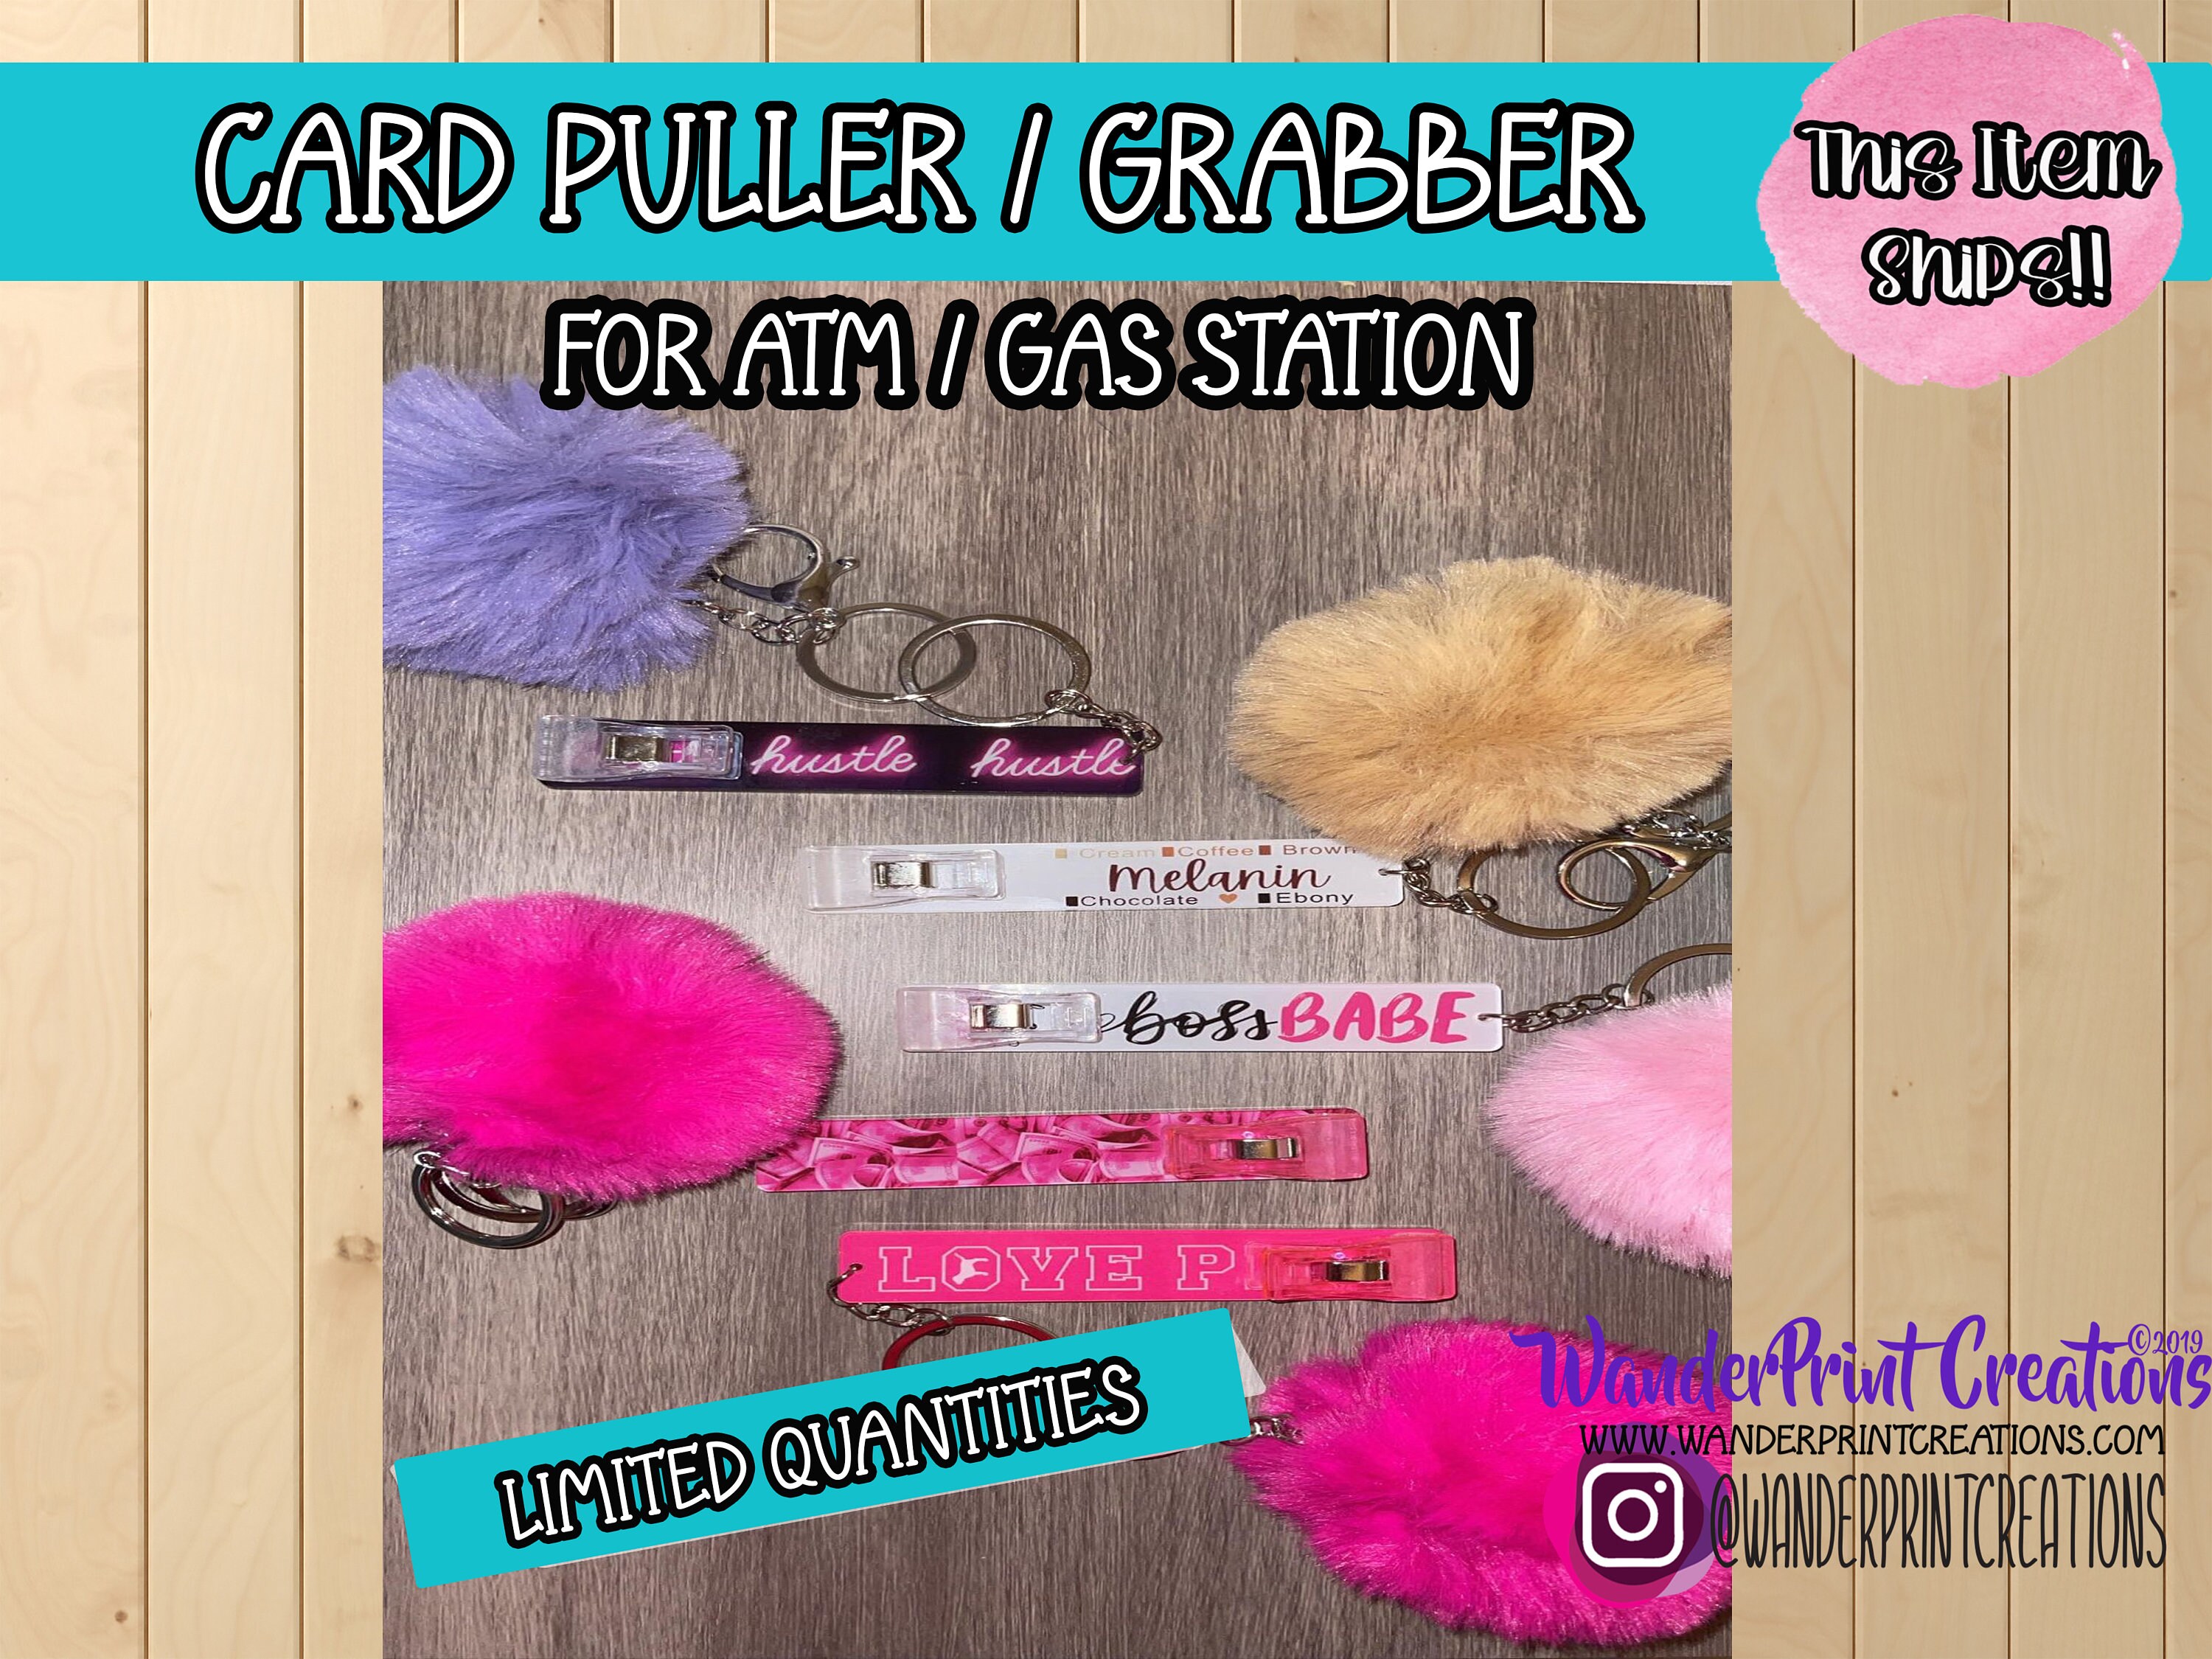 Original Swaggy Grabber Card Grabber Keychain for Long Nails, Jewelry  Helper Tool, Bracelet and Necklace Holder, Card Gripper, Gas Pump Tool 